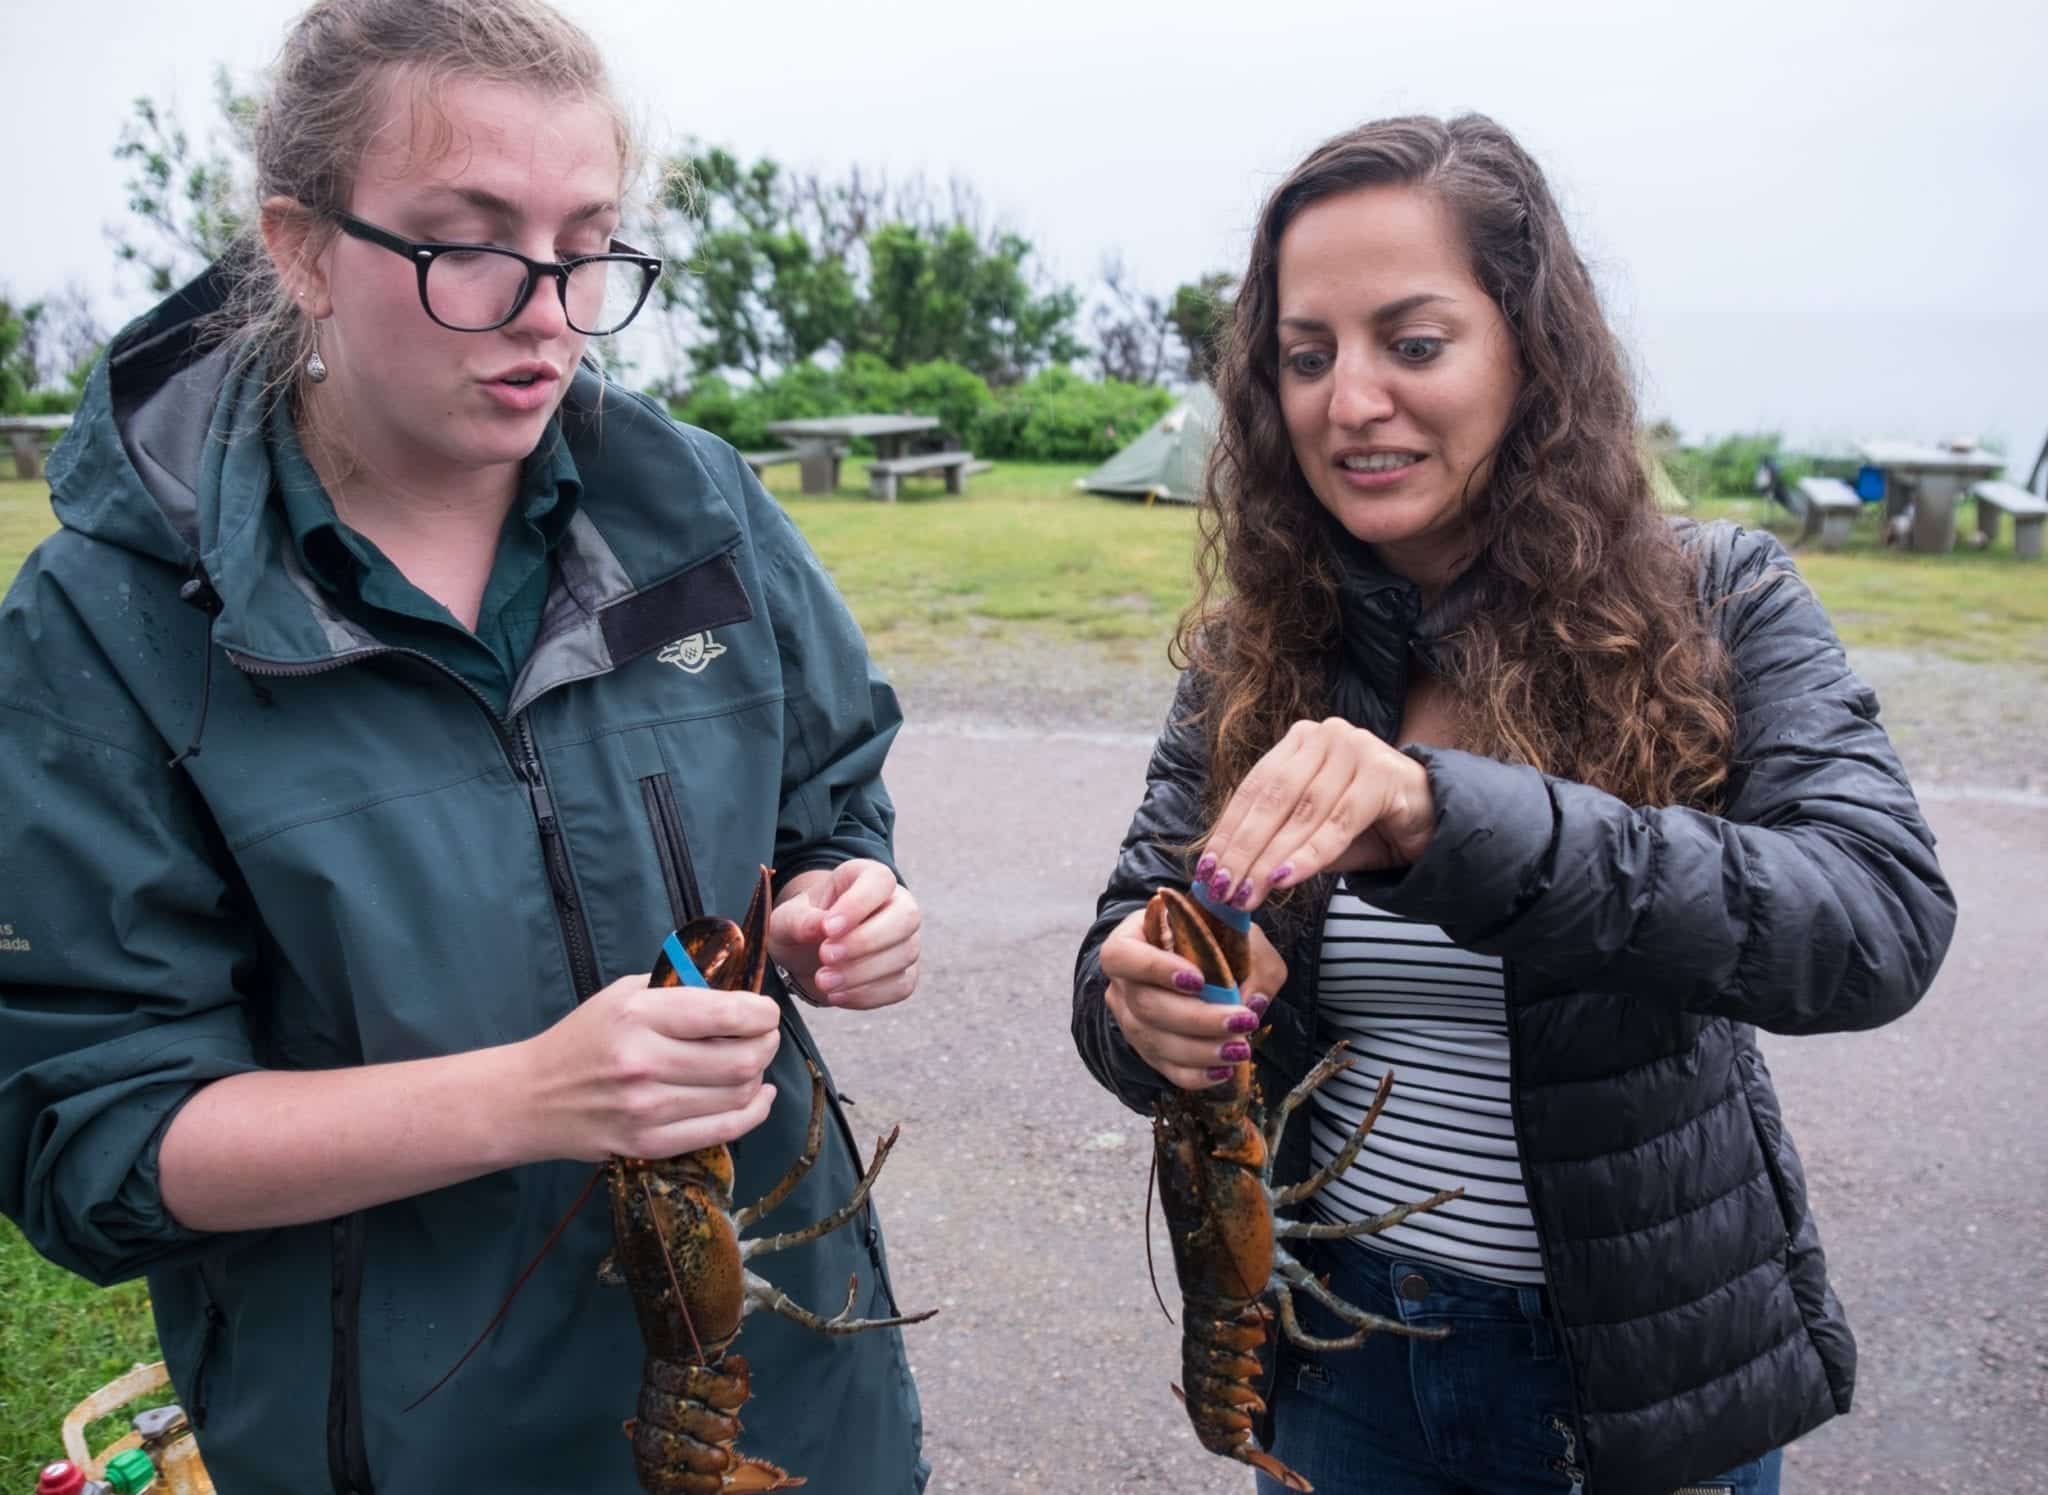 Kate pulls the rubber bands off her lobster's claws and grimaces while her guide pulls them off more expertly.